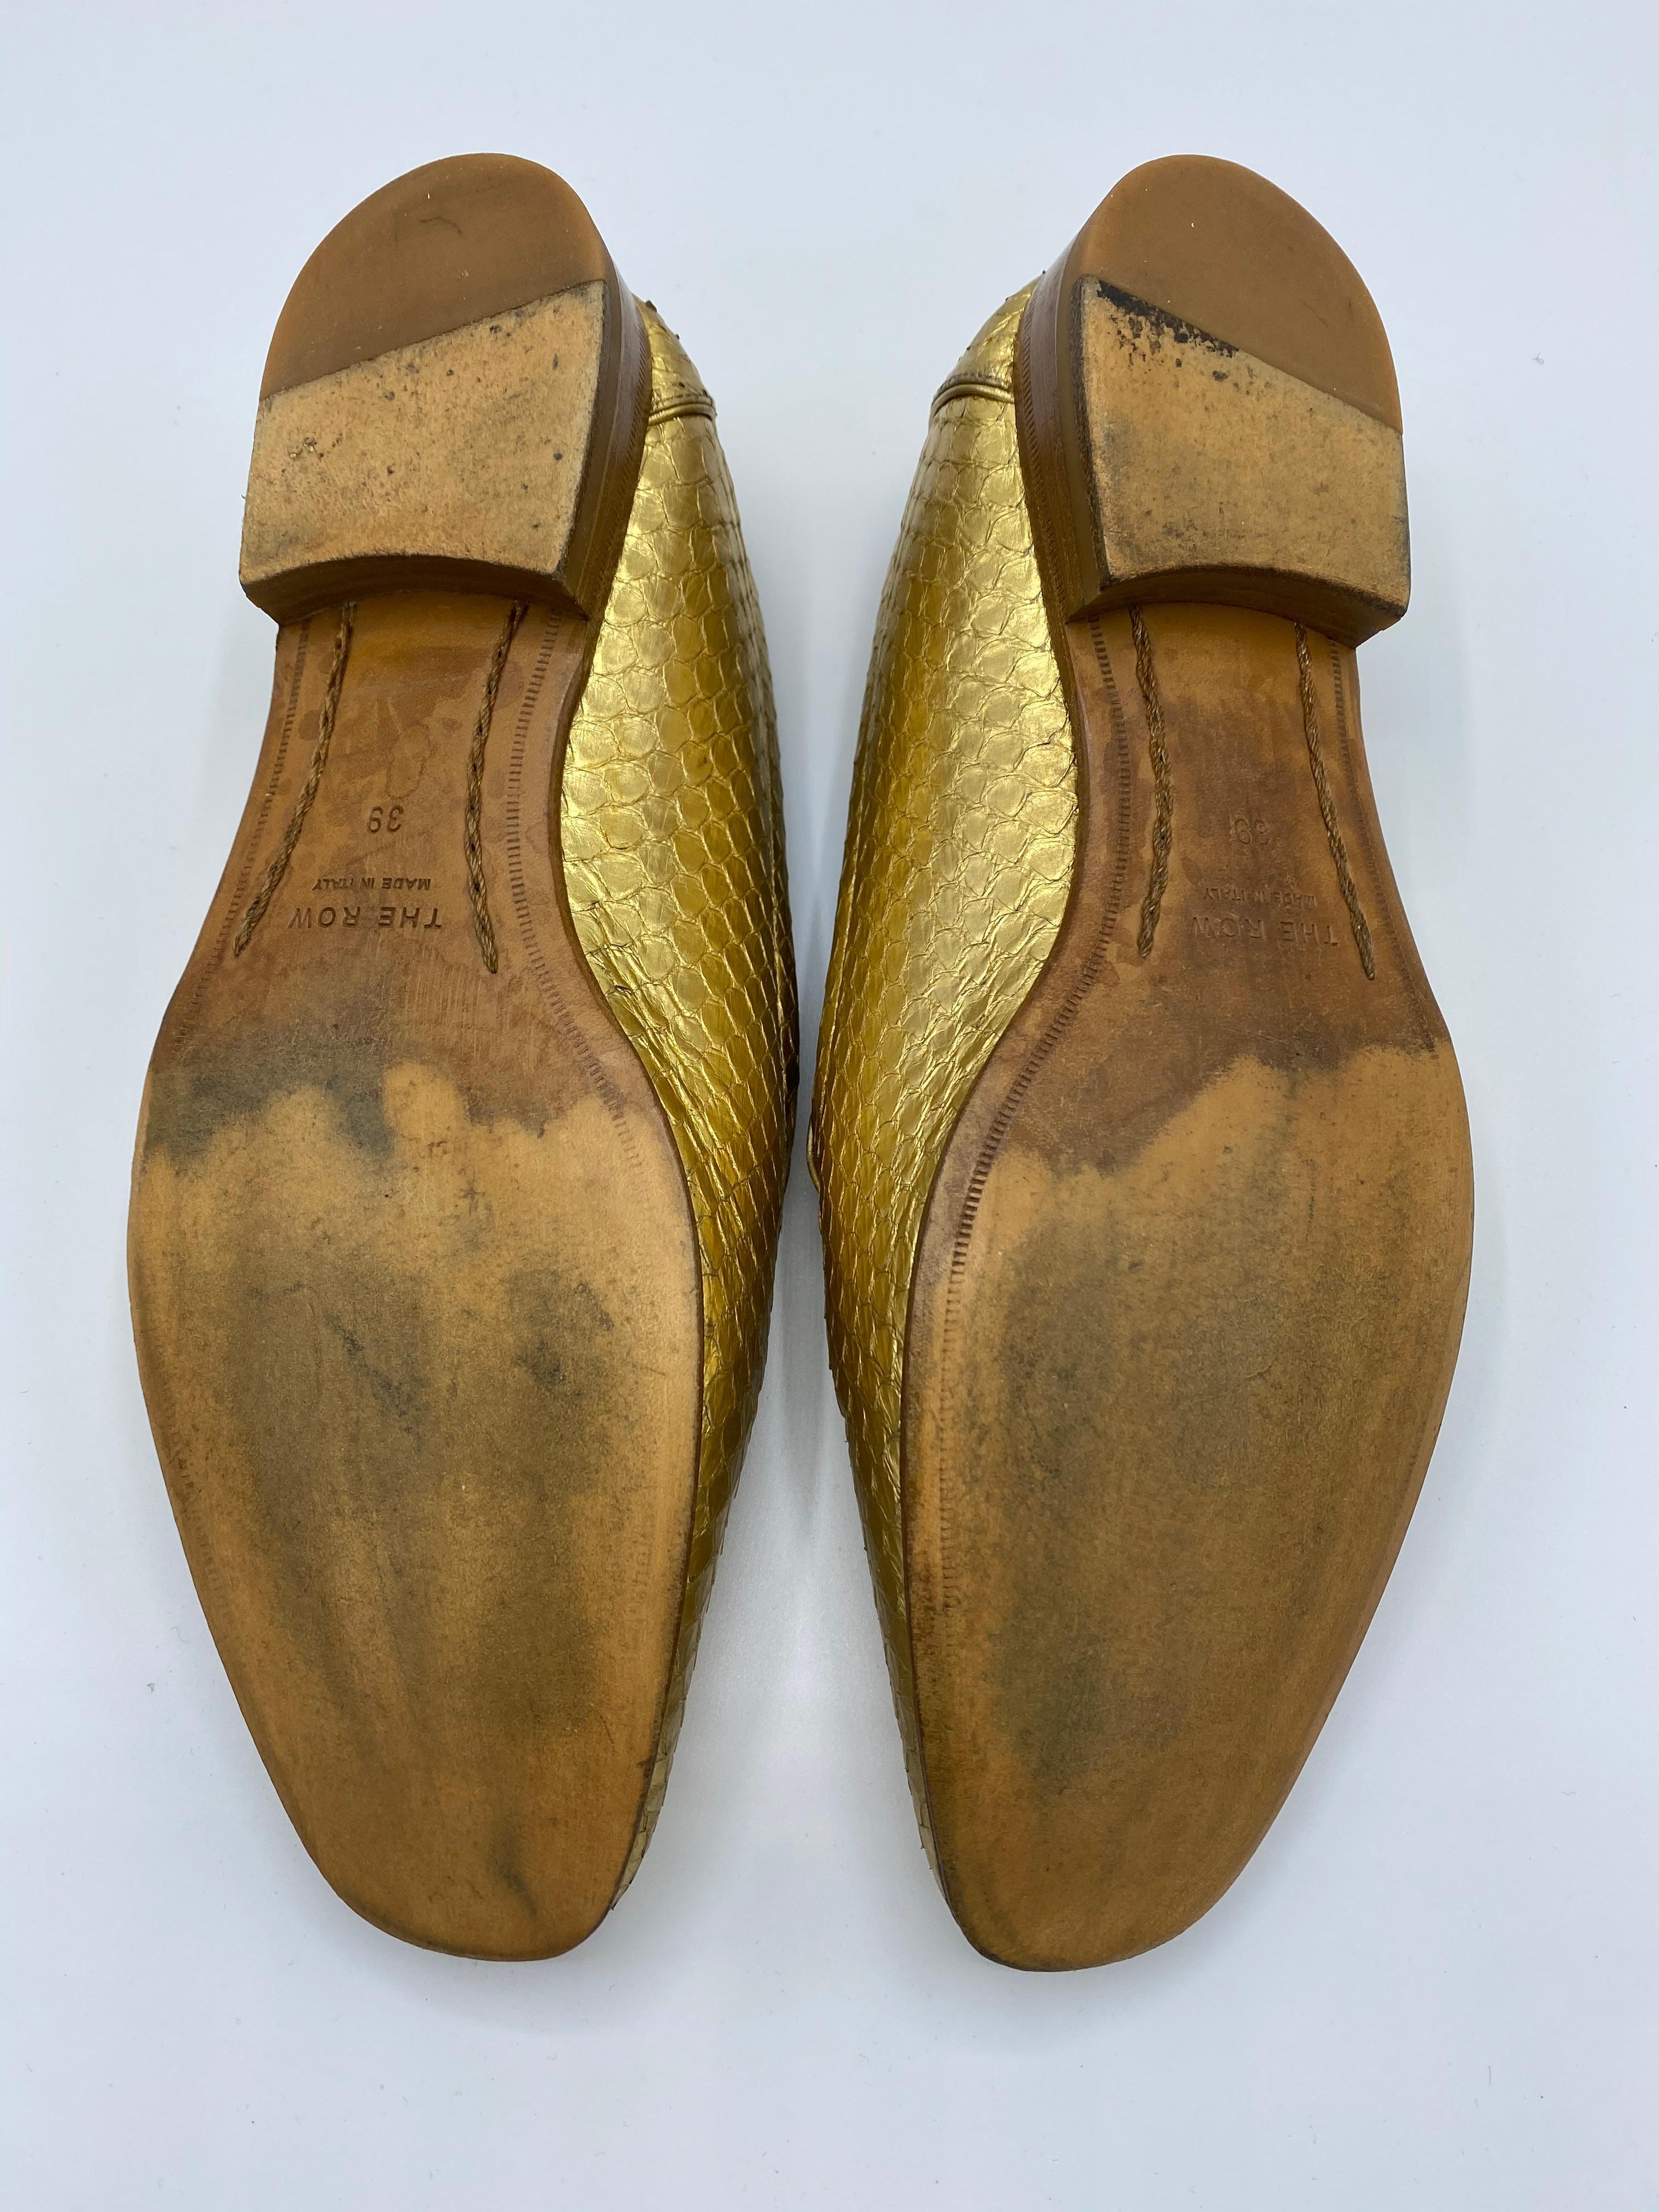 The Row Adam Mocassin Gold Watersnake Flat Shoes Size 39 For Sale 1